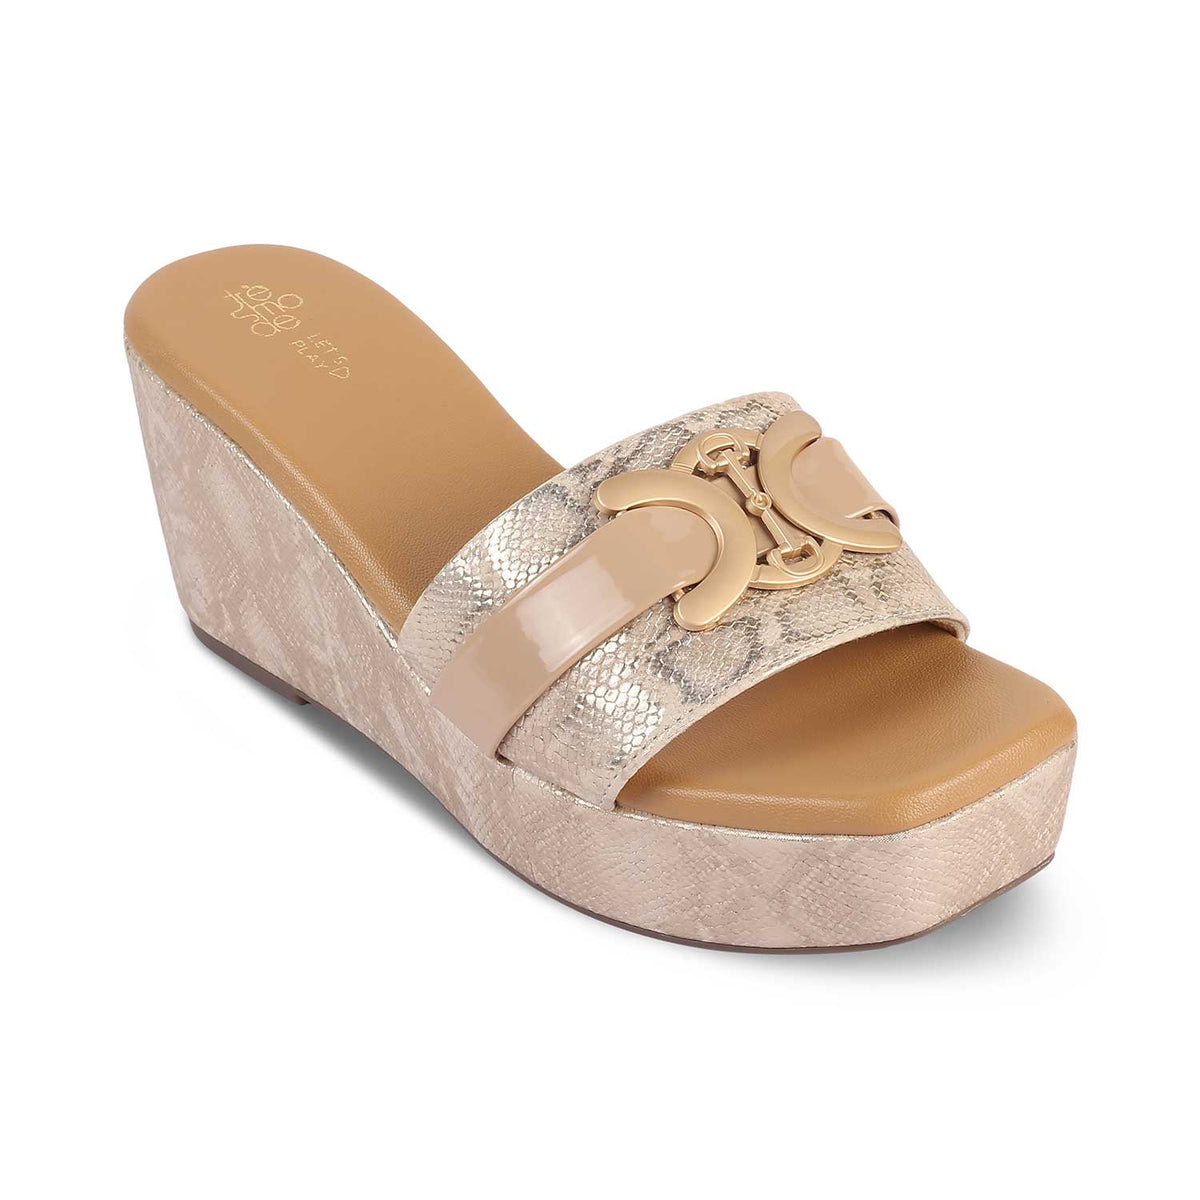 The Sbo Gold Women's Dress Wedge Sandals Tresmode